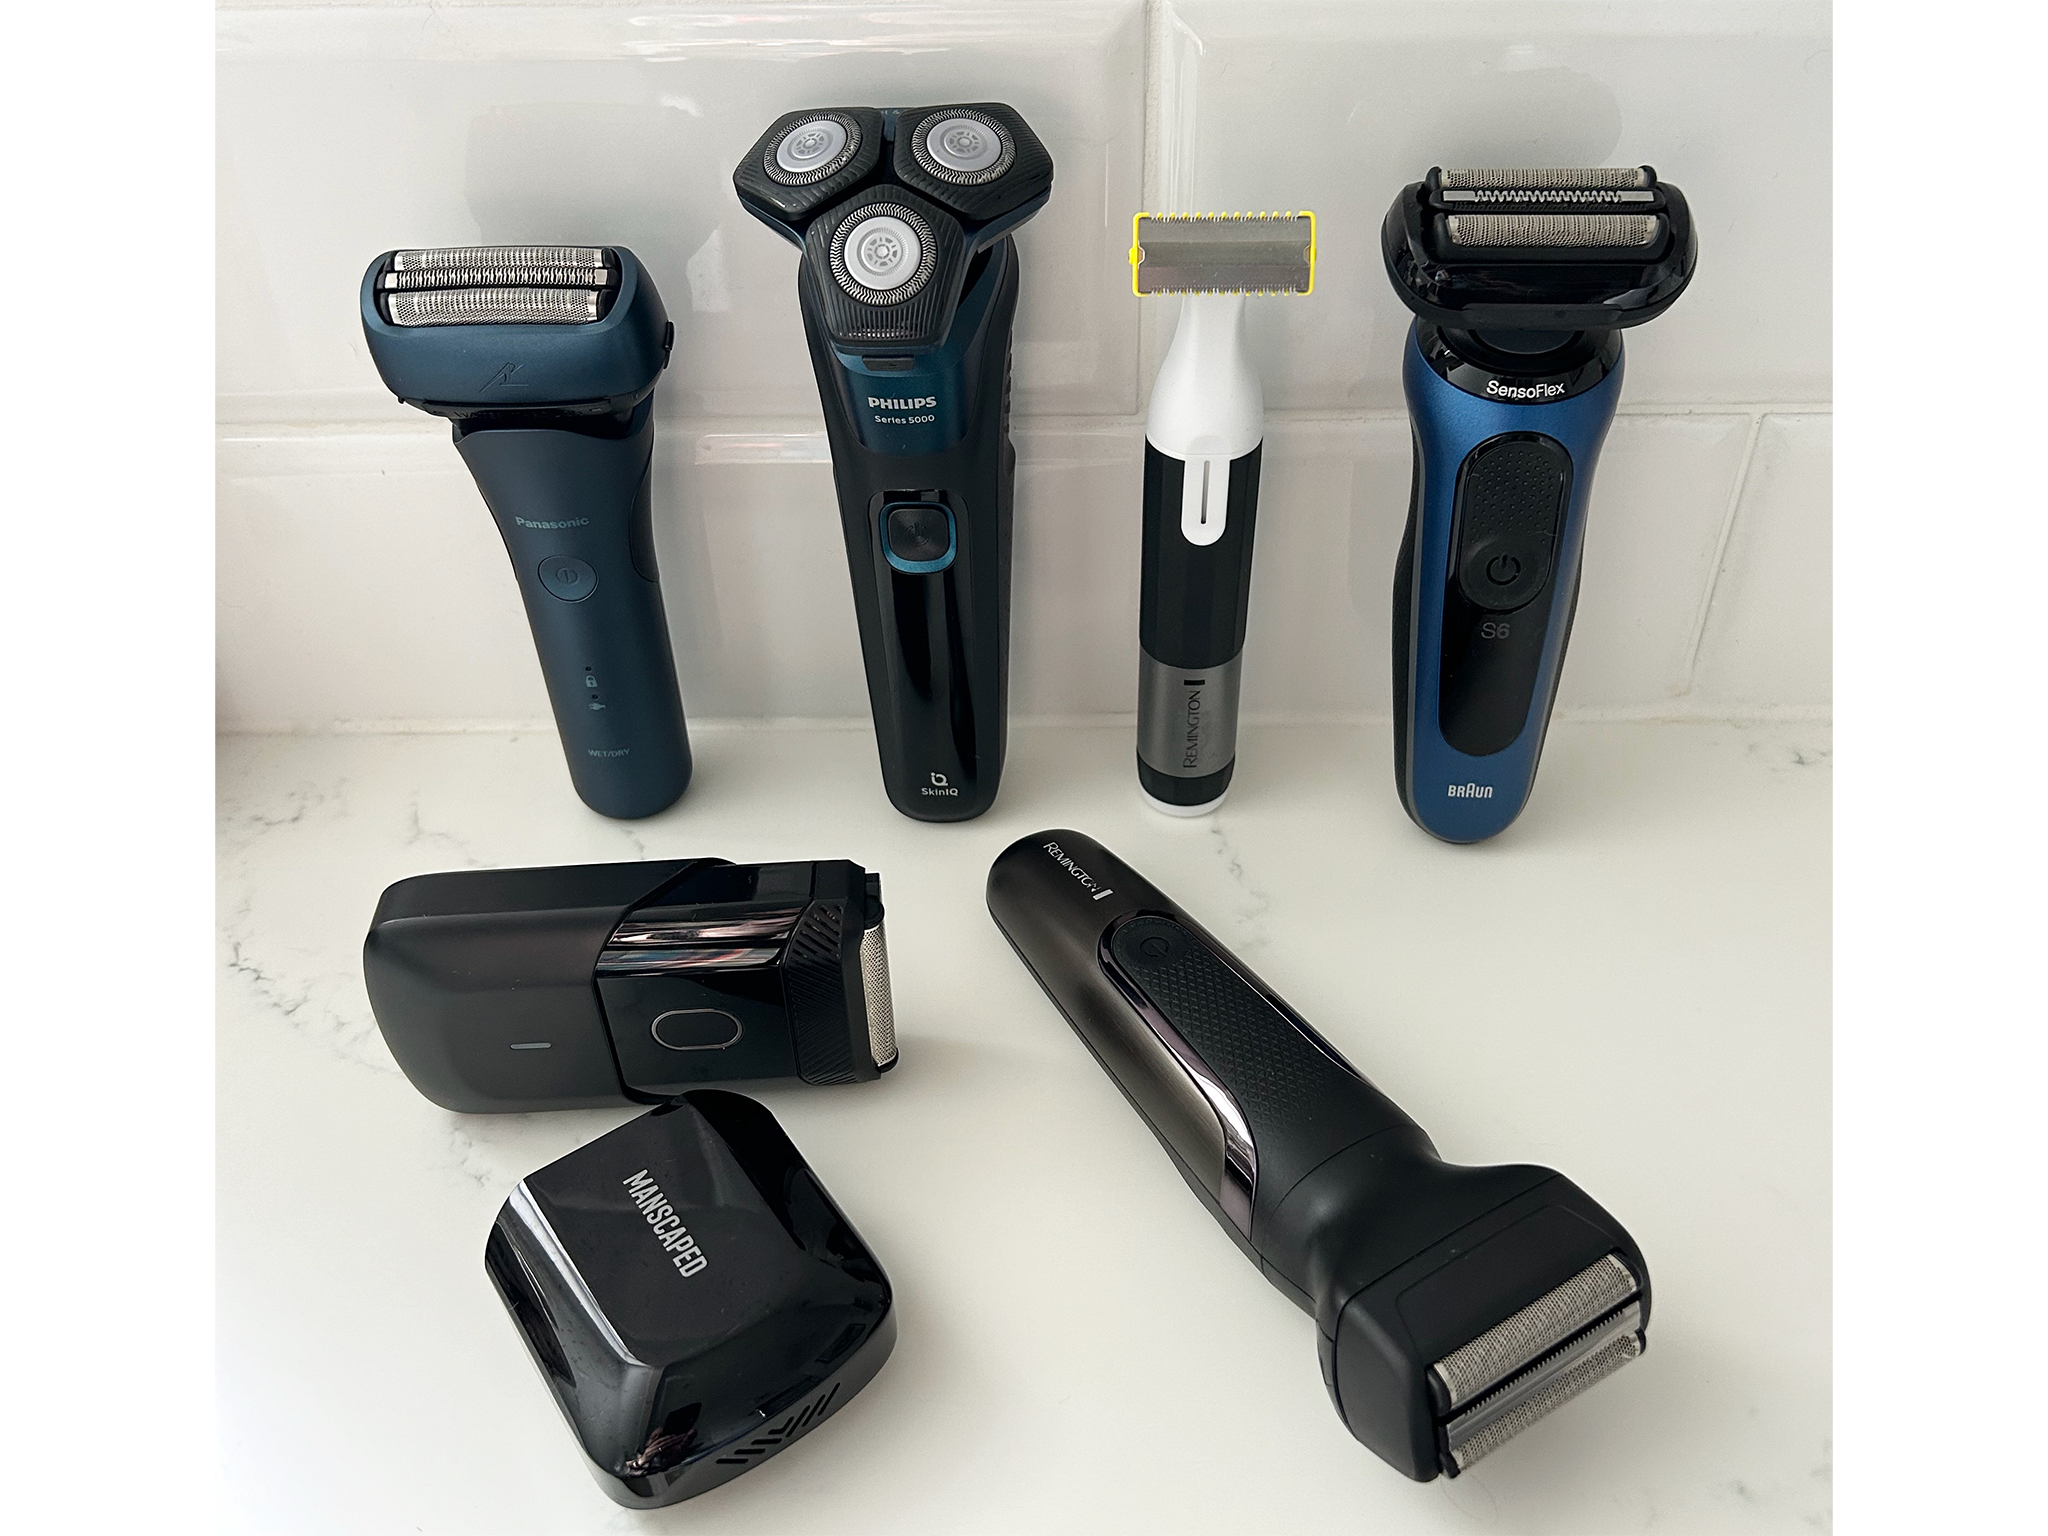 Some of the shavers we sampled